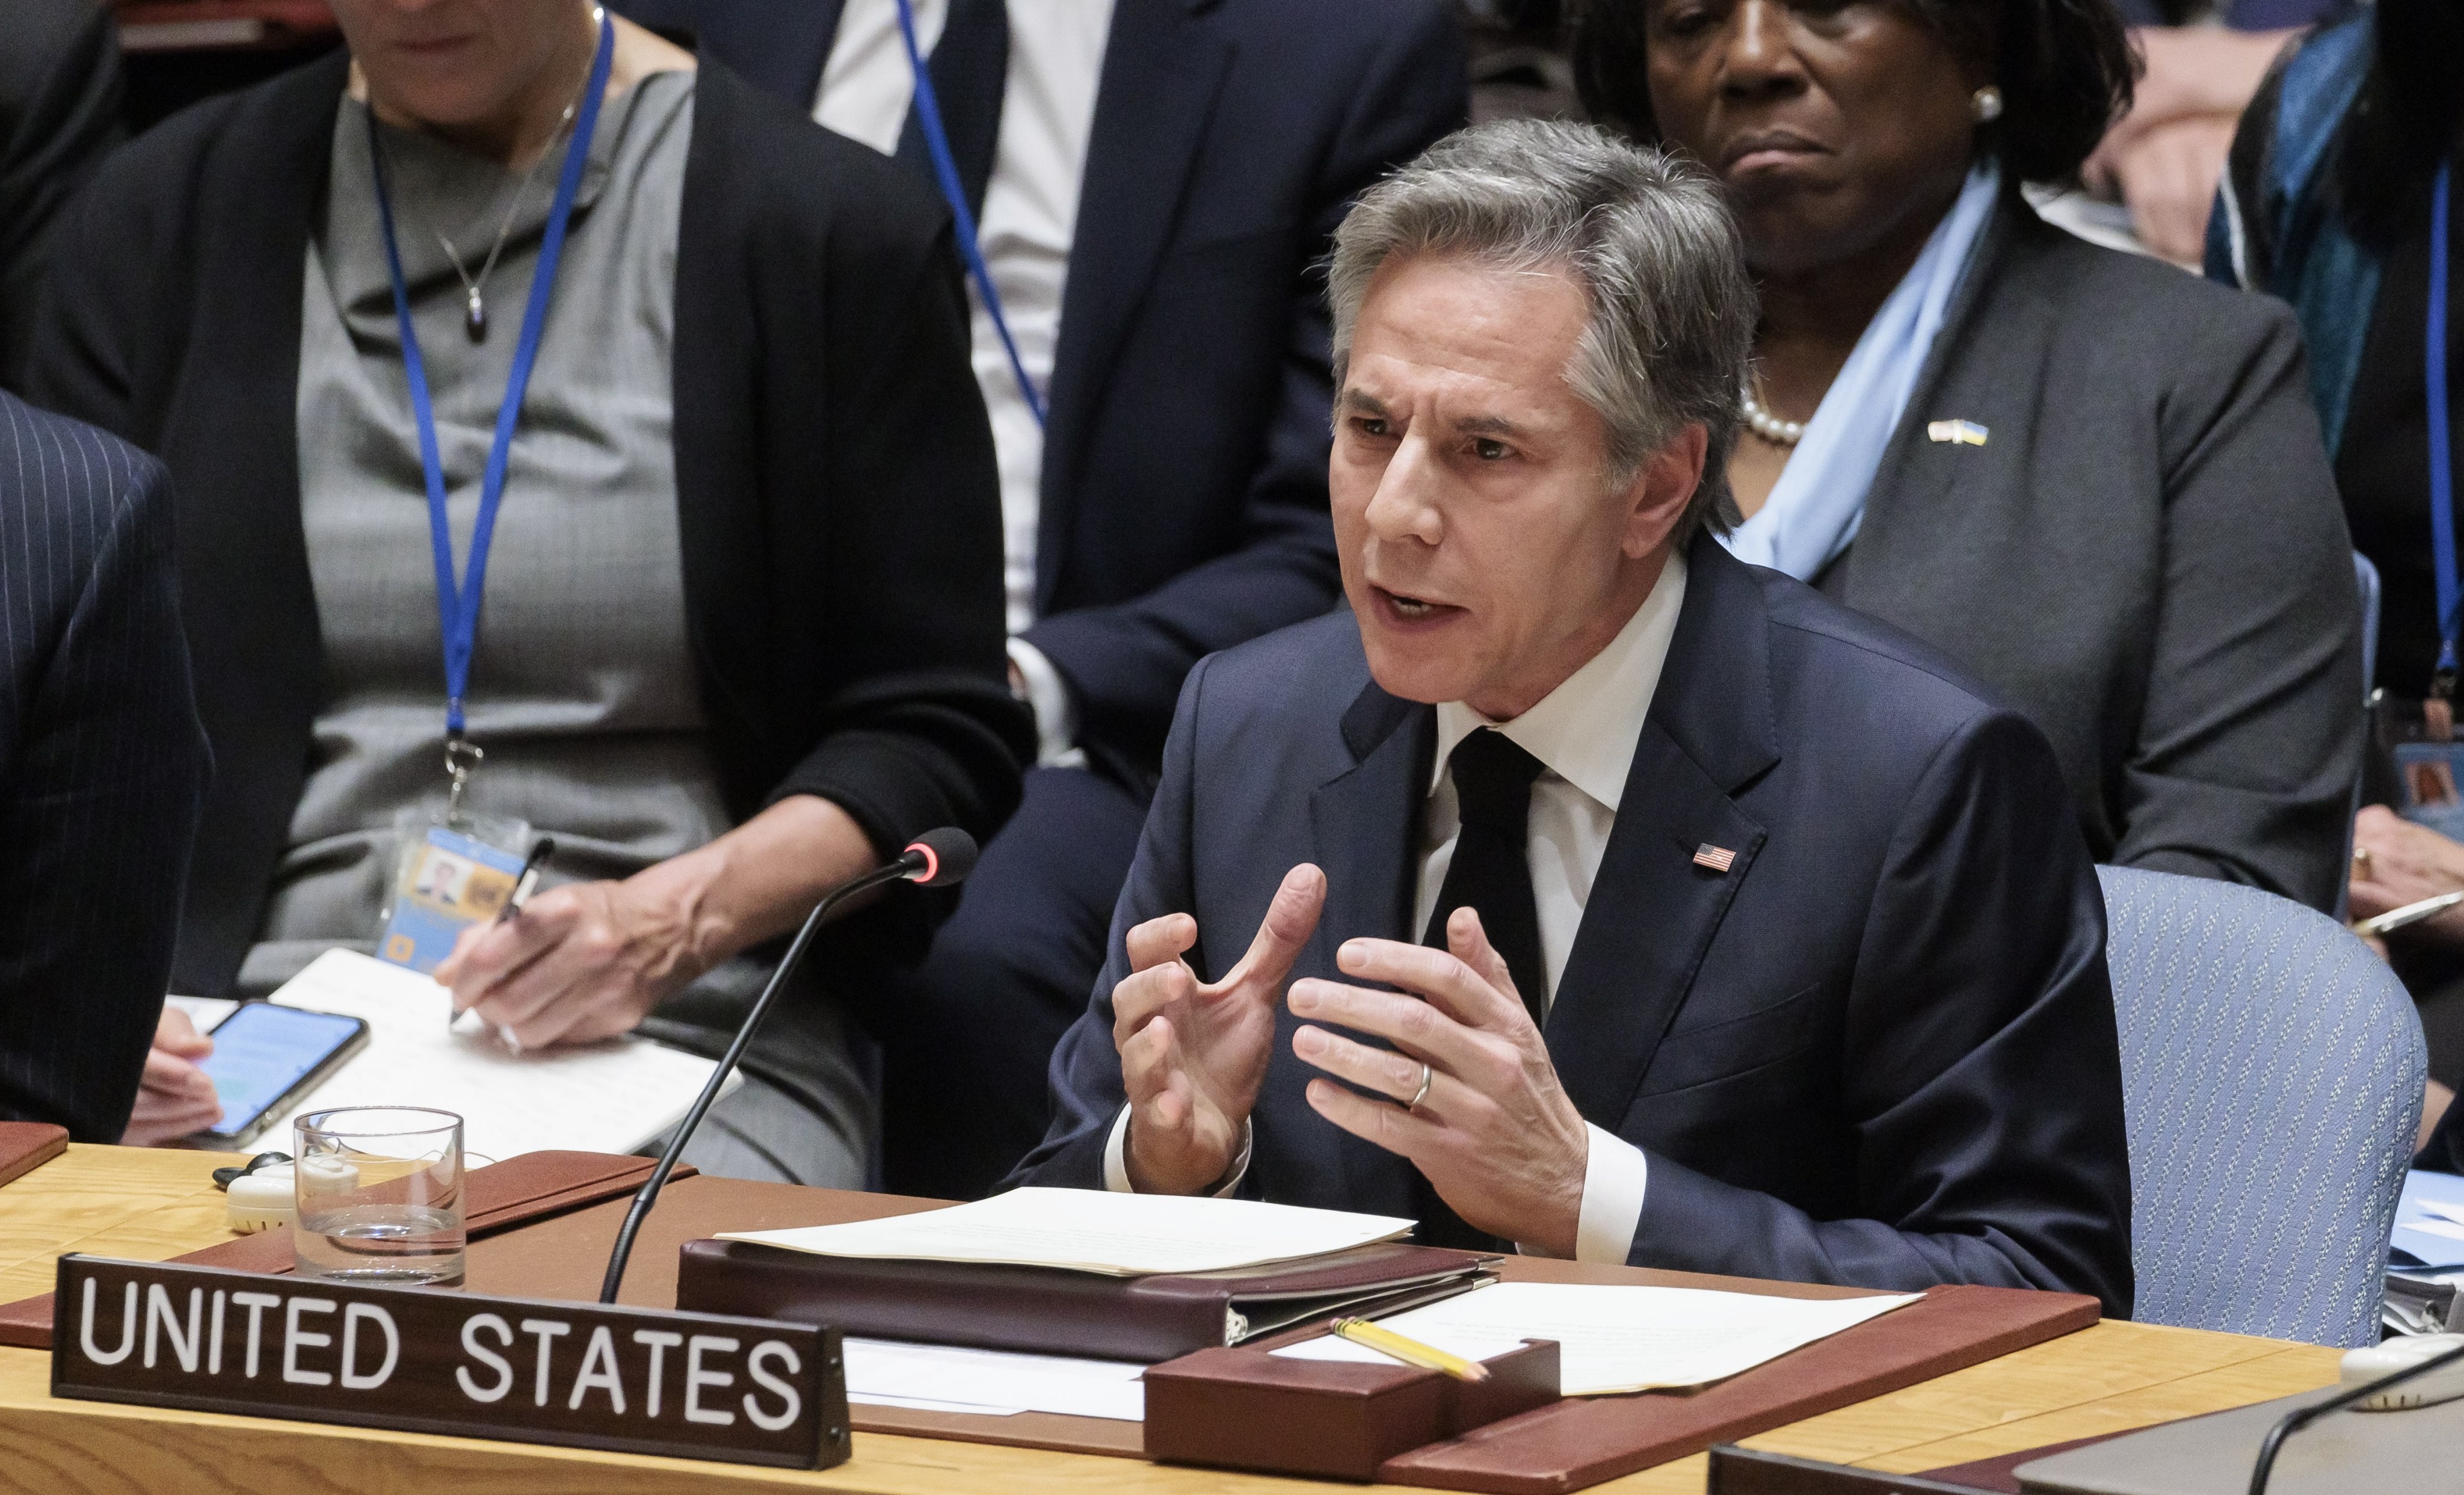 United States’ Secretary of State Anthony Blinken (centre) addresses a high-level United Nations Security Council meeting on the conflict in Ukraine, at United Nations headquarters in New York on Friday. Photo: EPA-EFE